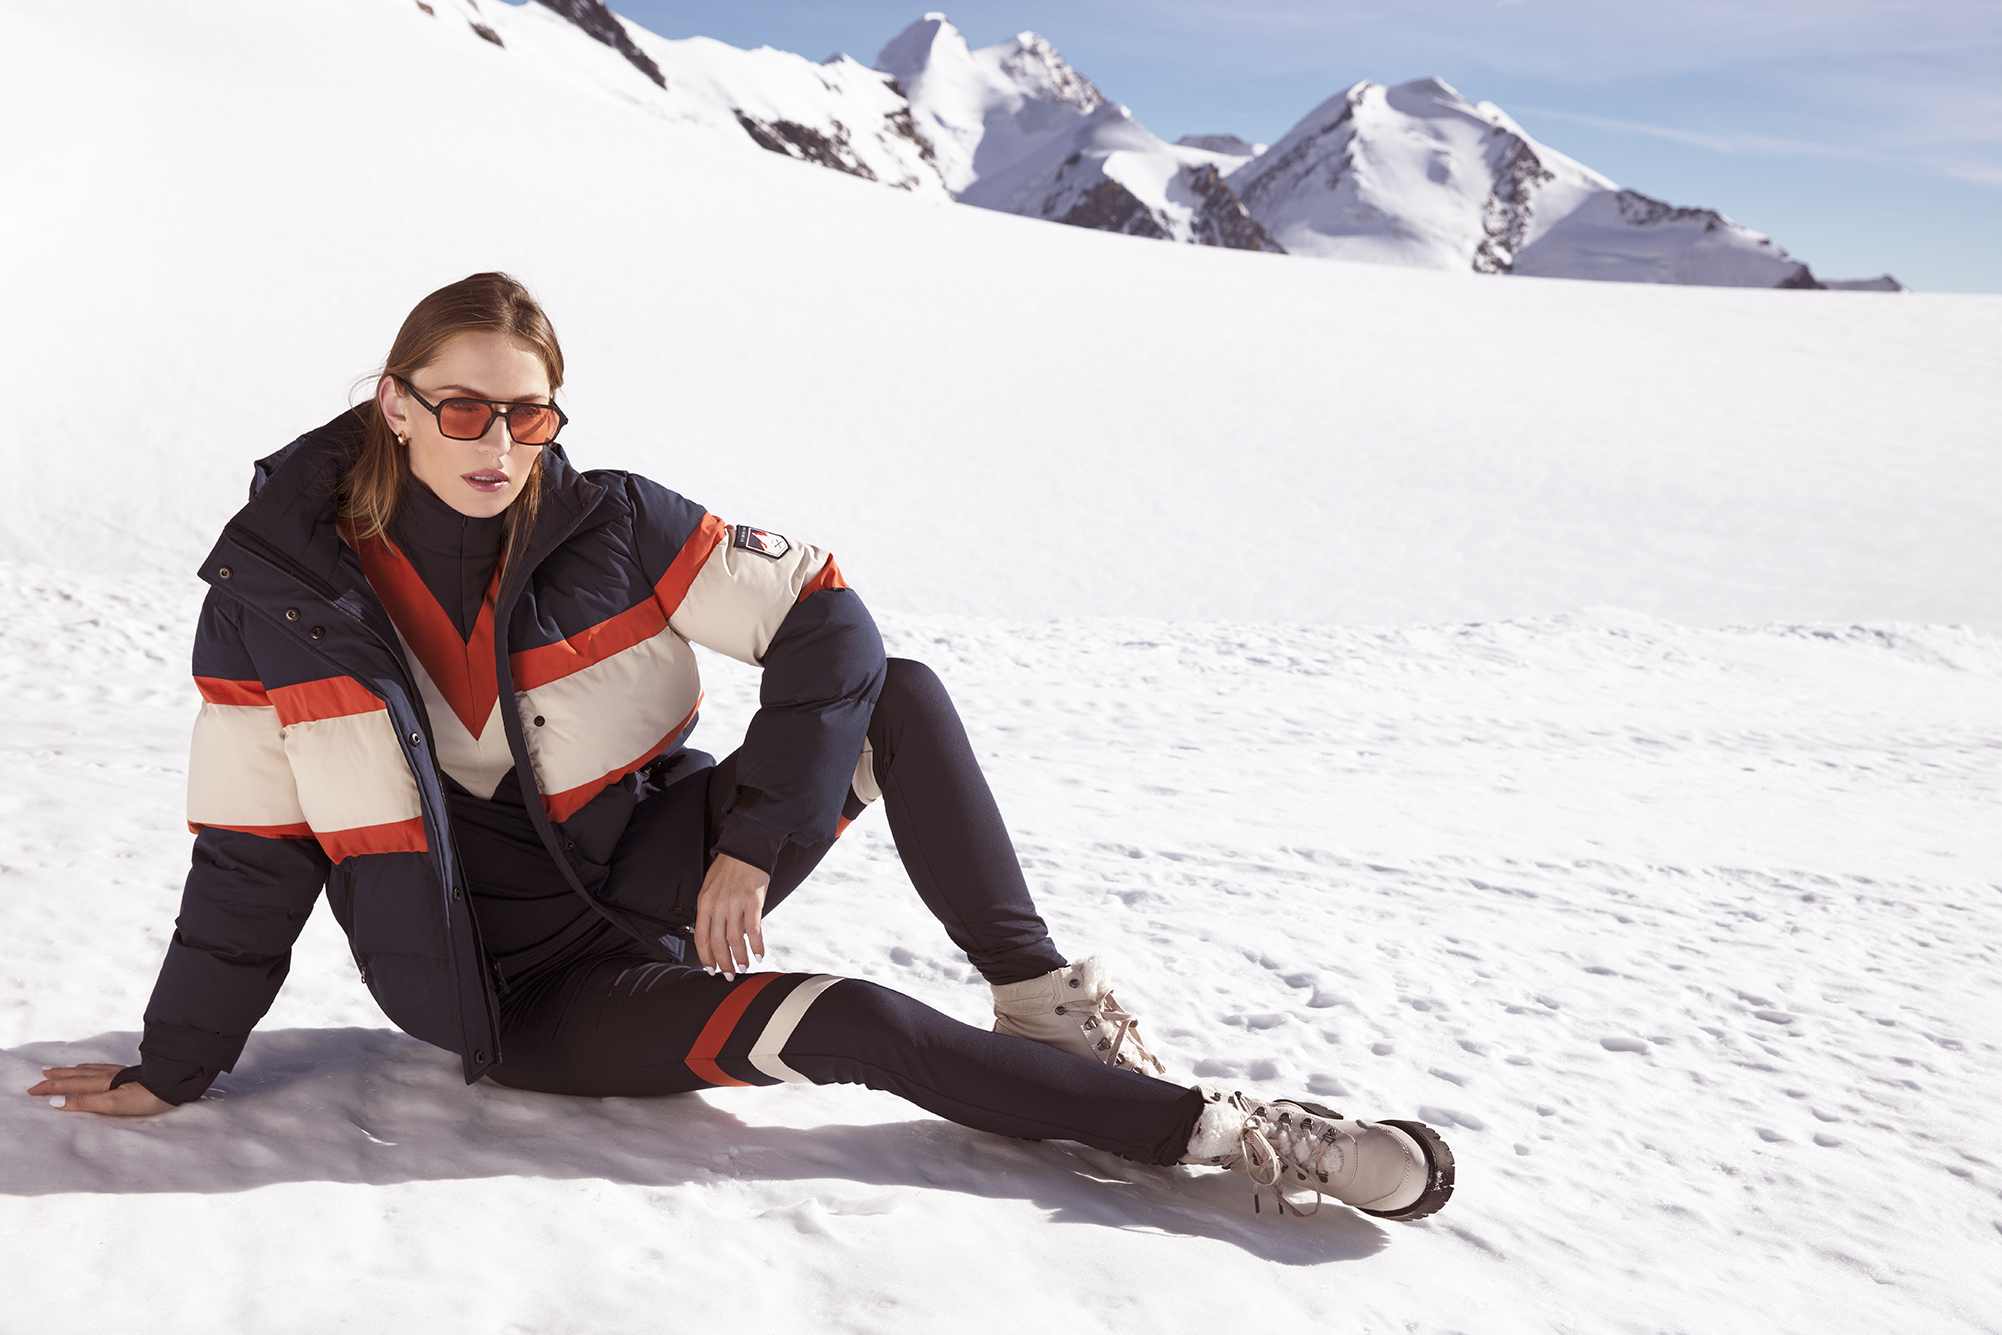 Why The Ski Capsule from By Malina is the ultimate ski collection you need for winter 21/22. 7